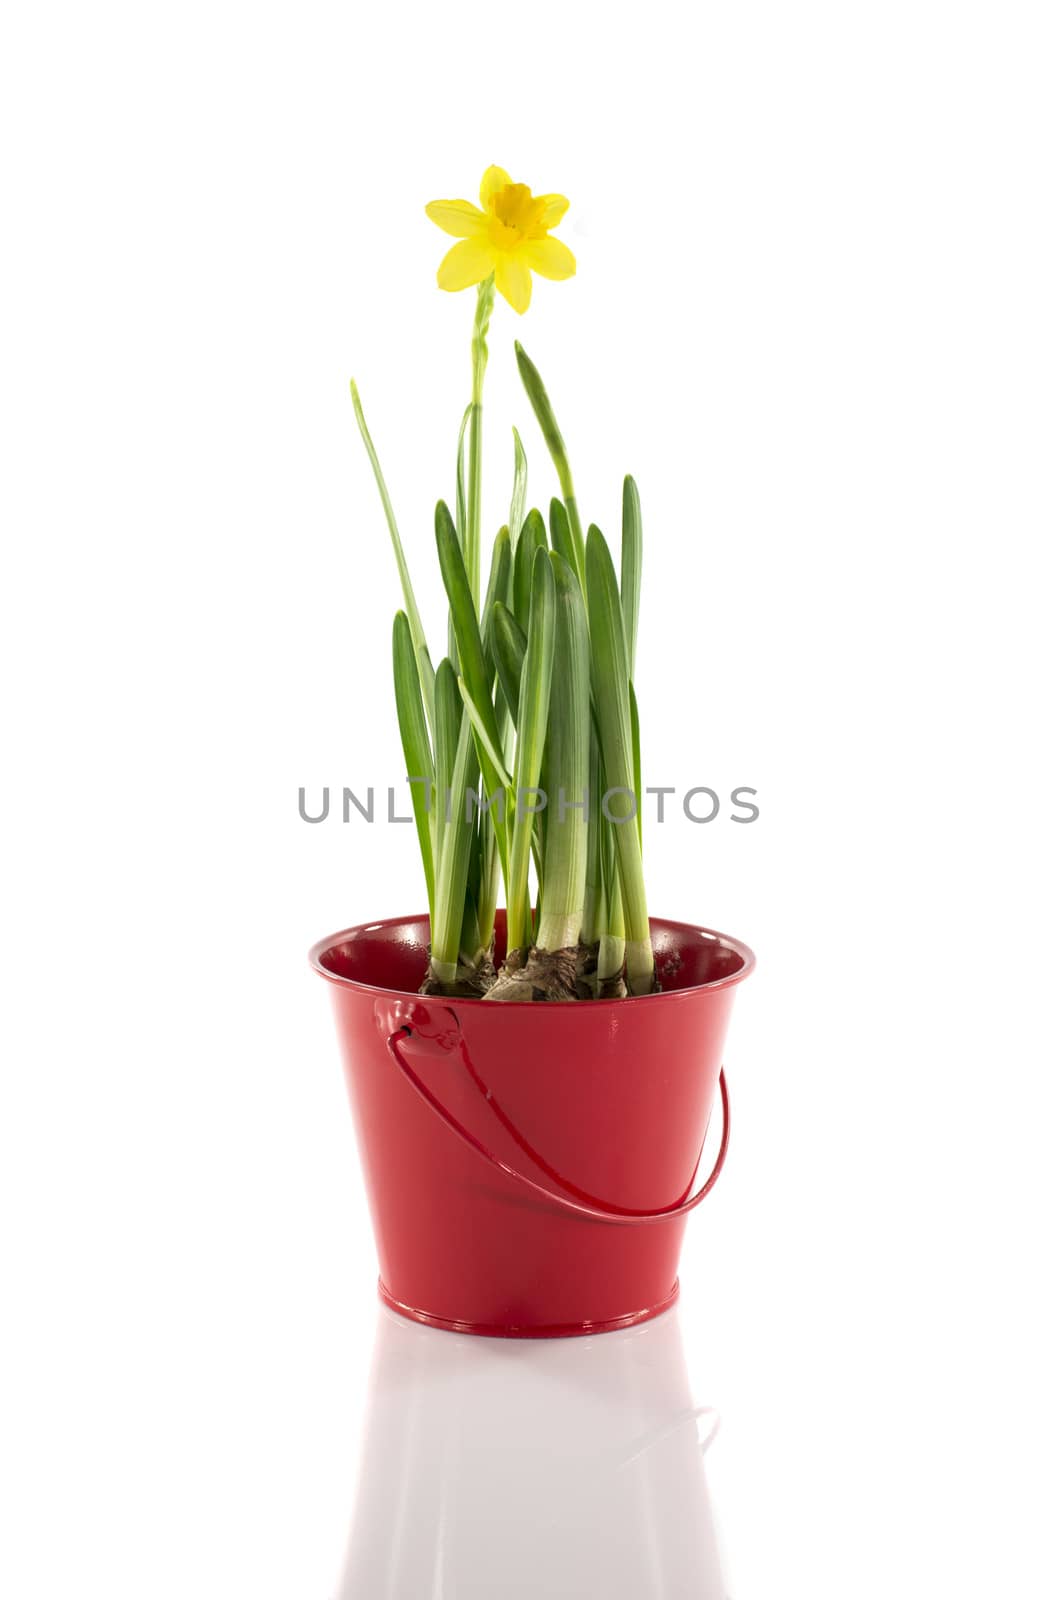 red bucket with yellow narcissus by compuinfoto